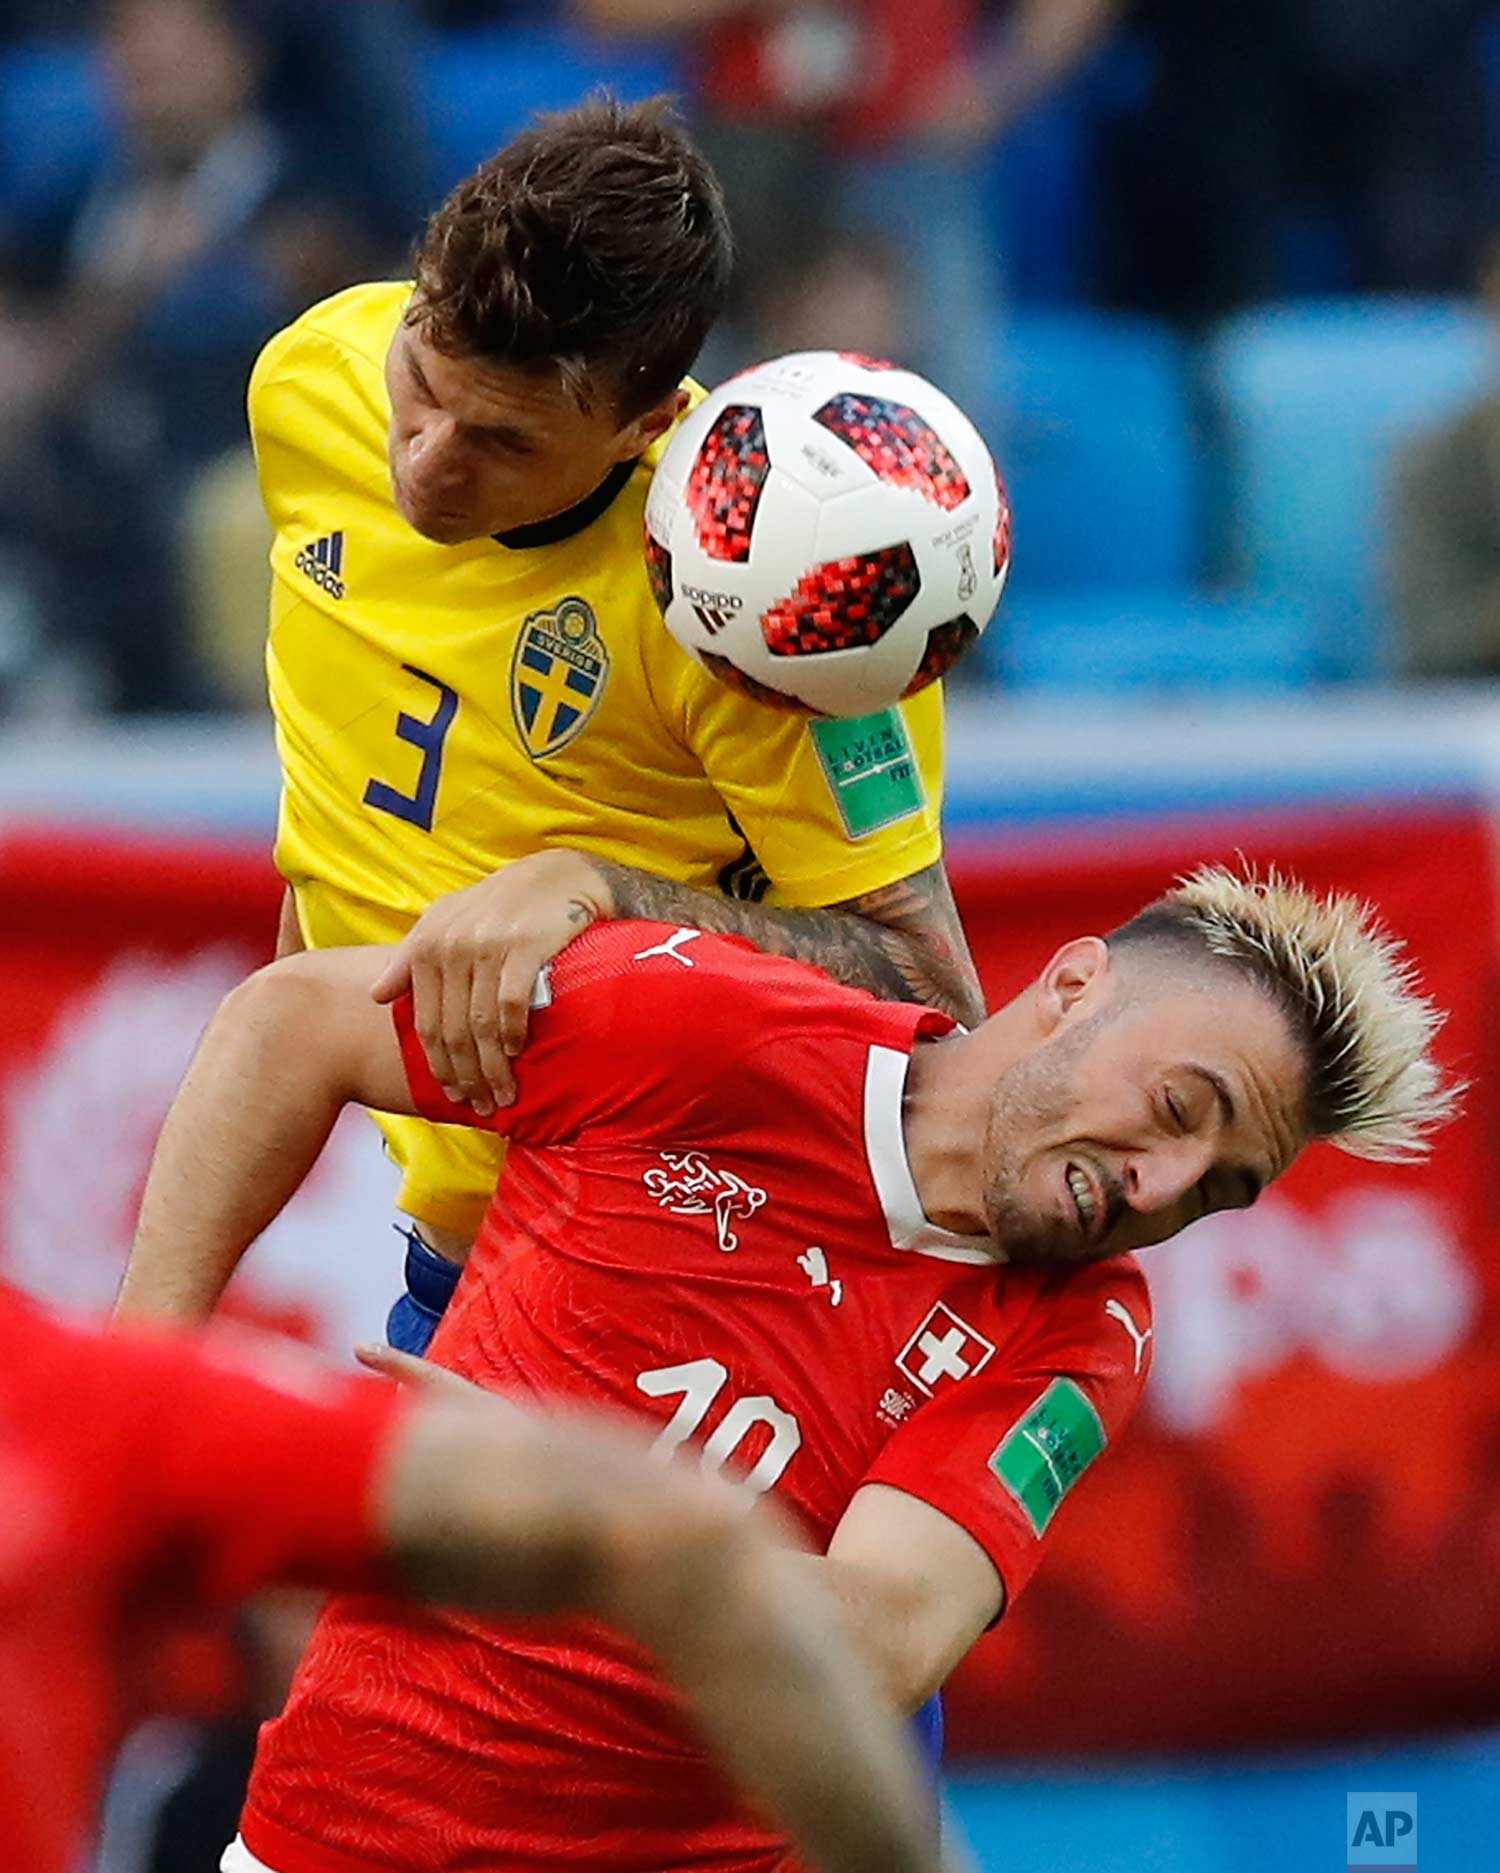  Sweden's Victor Lindelof, left, heads for the ball with Switzerland's Granit Xhaka during the round of 16 match between Switzerland and Sweden at the 2018 soccer World Cup in the St. Petersburg Stadium, in St. Petersburg, Russia, Tuesday, July 3, 20